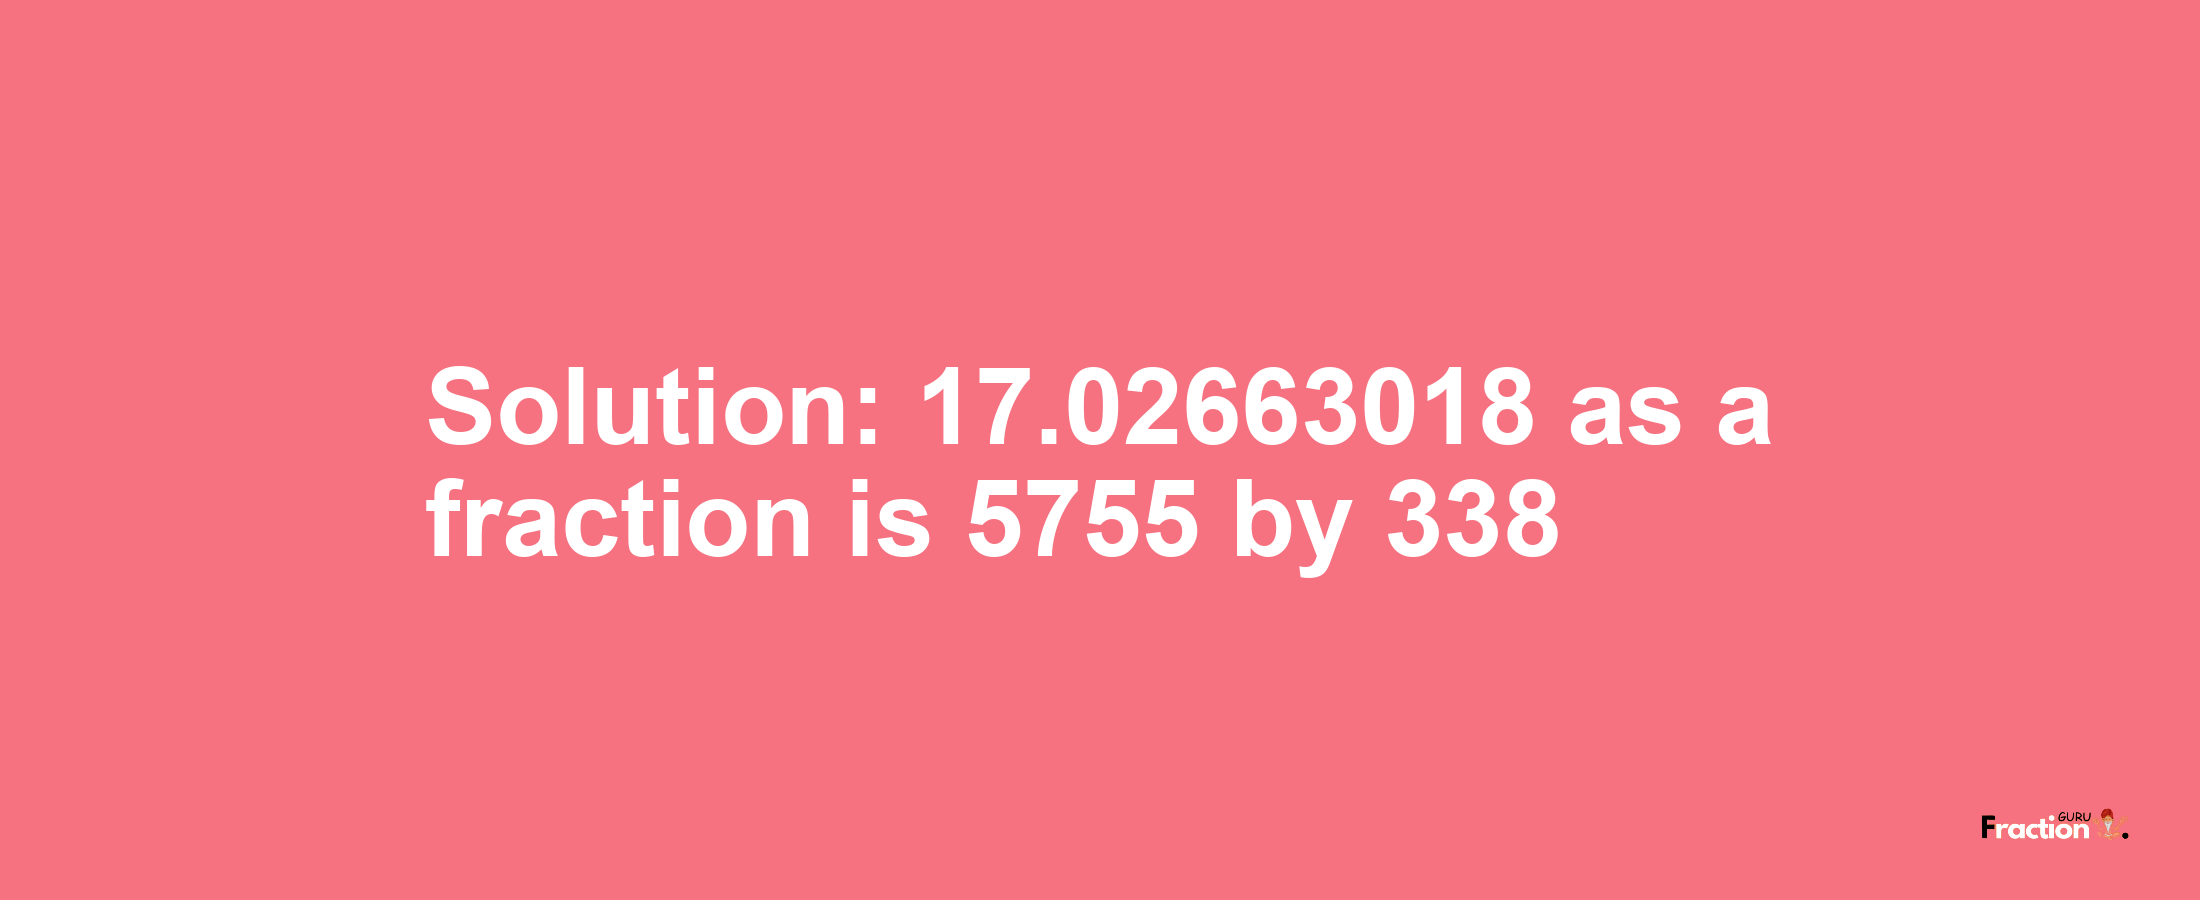 Solution:17.02663018 as a fraction is 5755/338